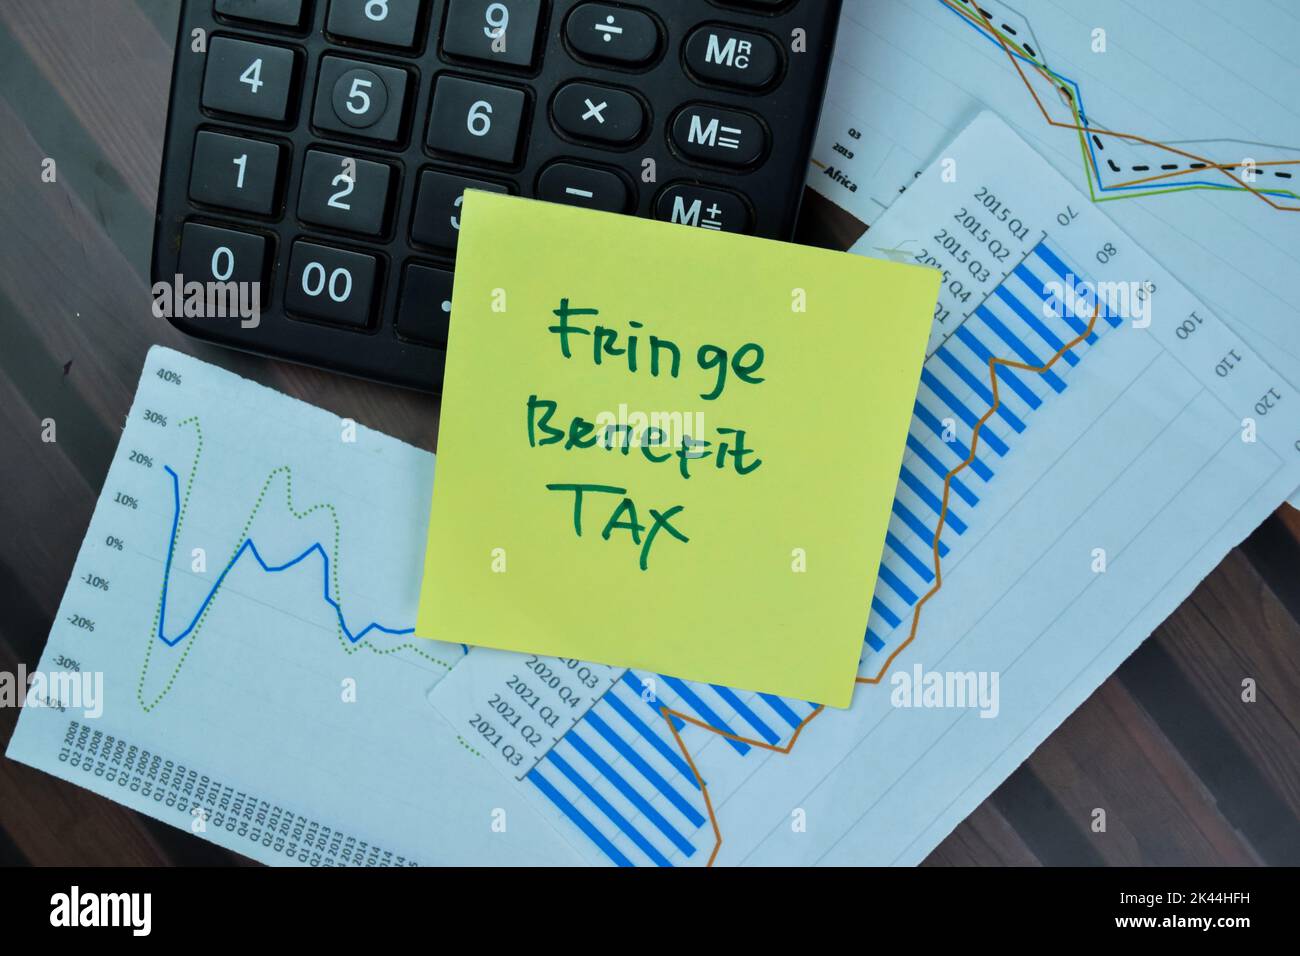 Concept of Fringe Benefit Tax write on sticky notes isolated on Wooden Table. Stock Photo